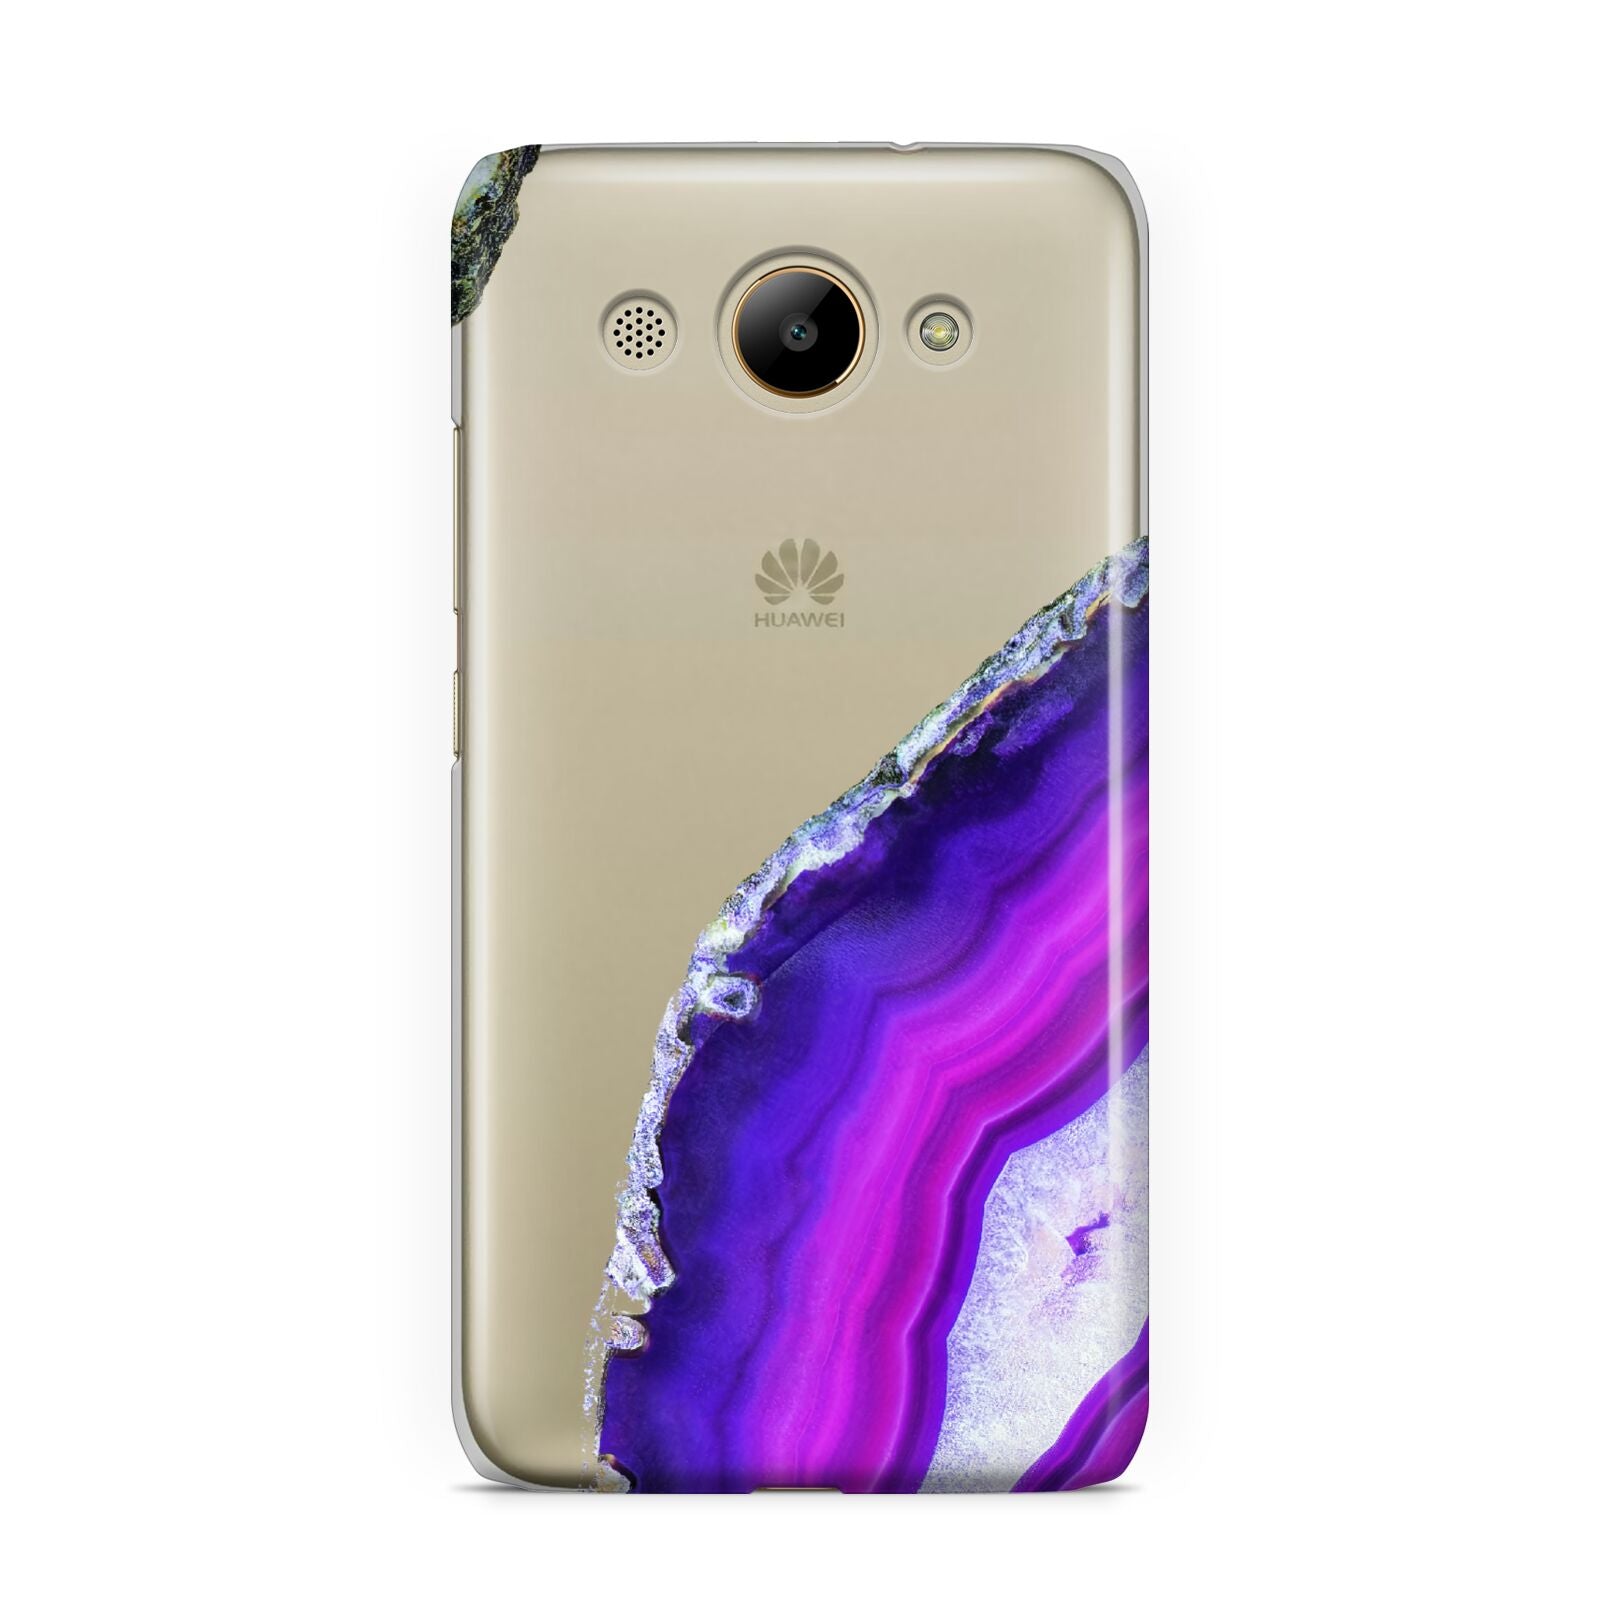 Agate Purple and Pink Huawei Y3 2017